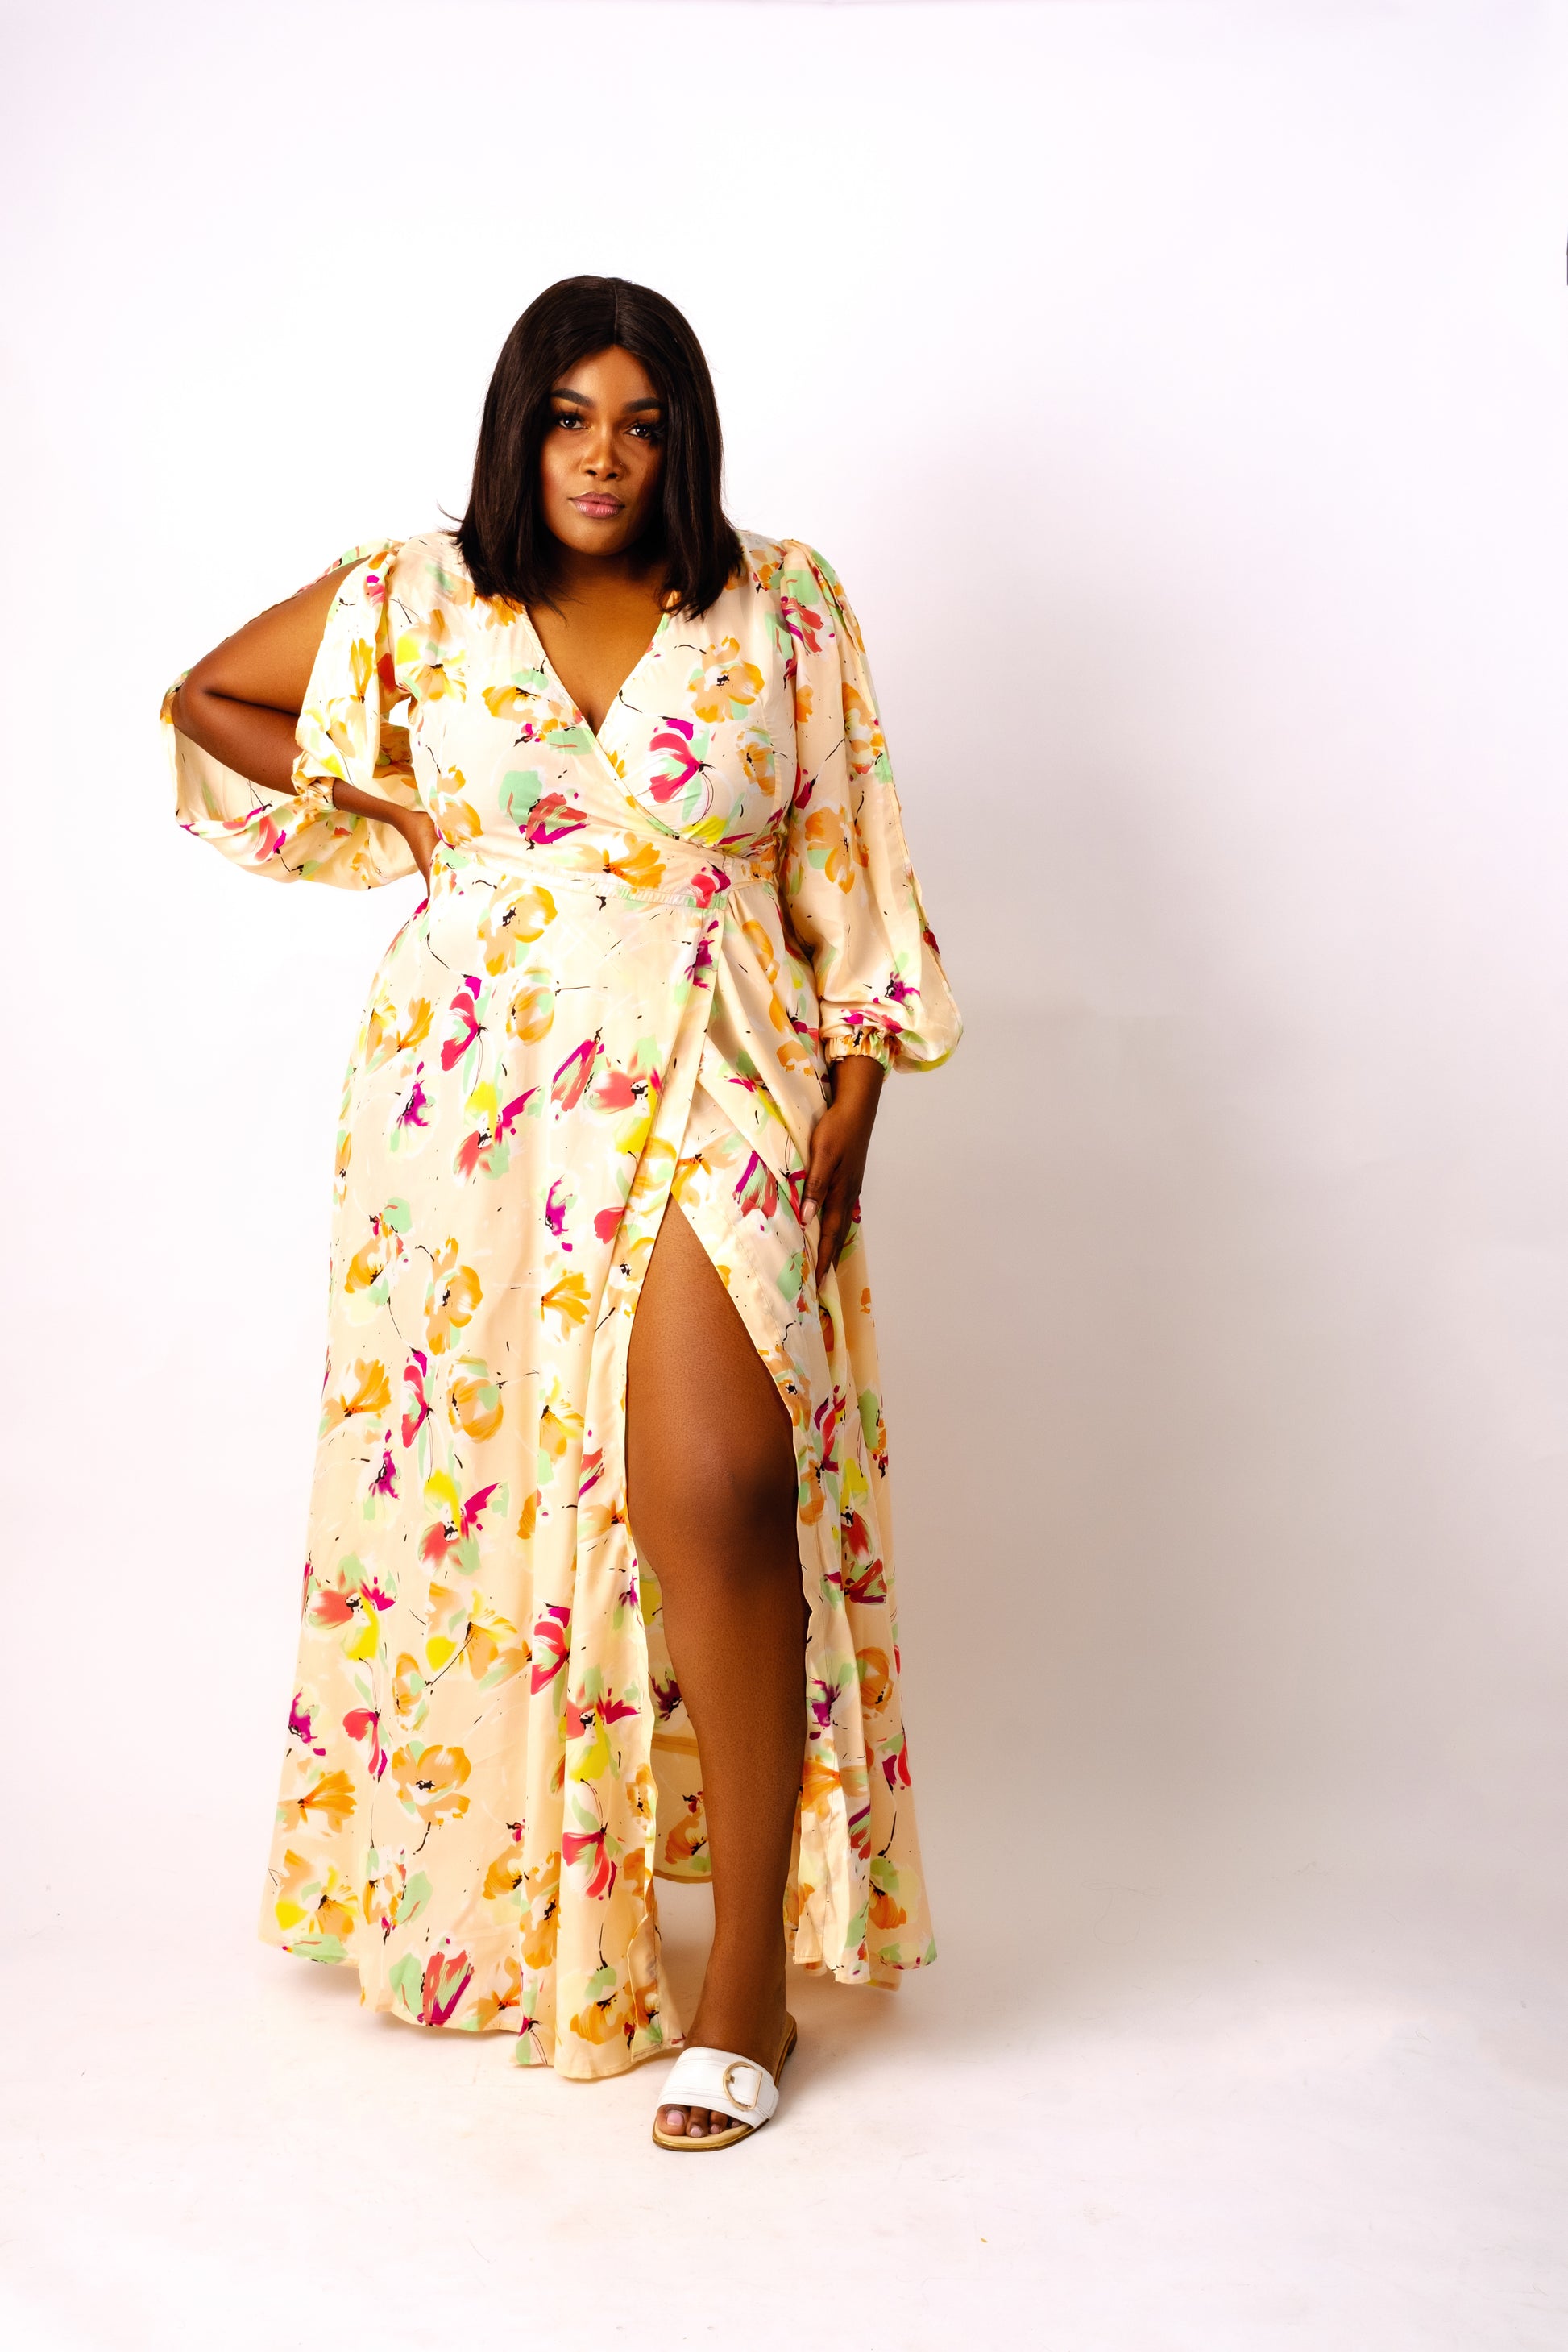 Peach light chiffon floral long/maxi wrap dress featuring a V-neckline and long split sleeves.